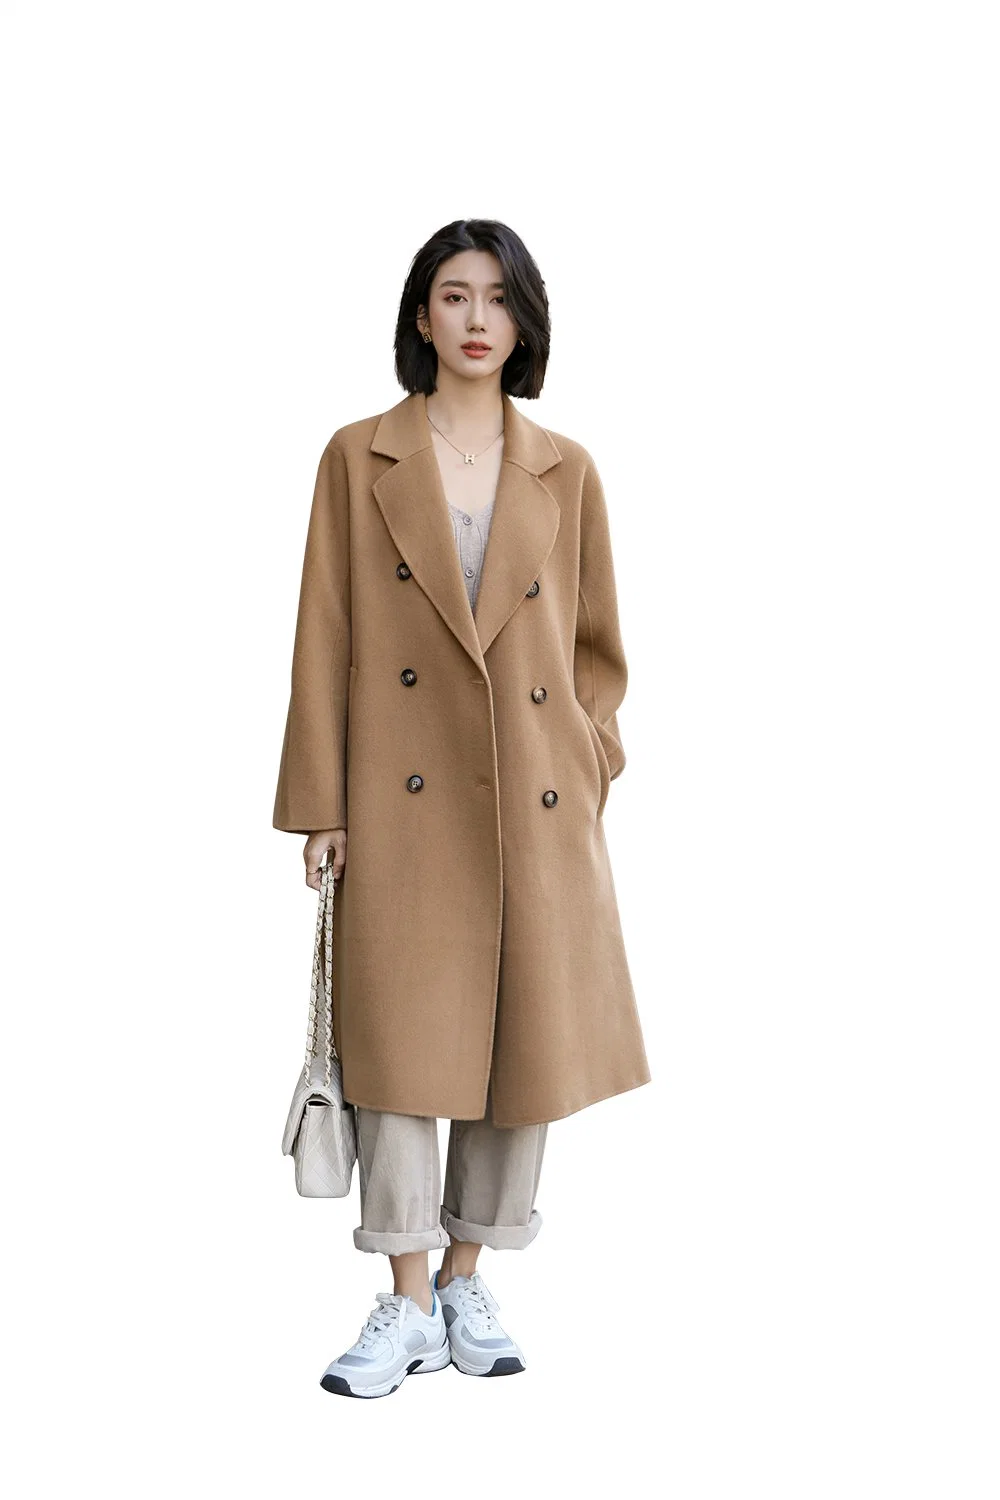 Double Breasted Solid Woolen Handmade Women Long Trench Coat